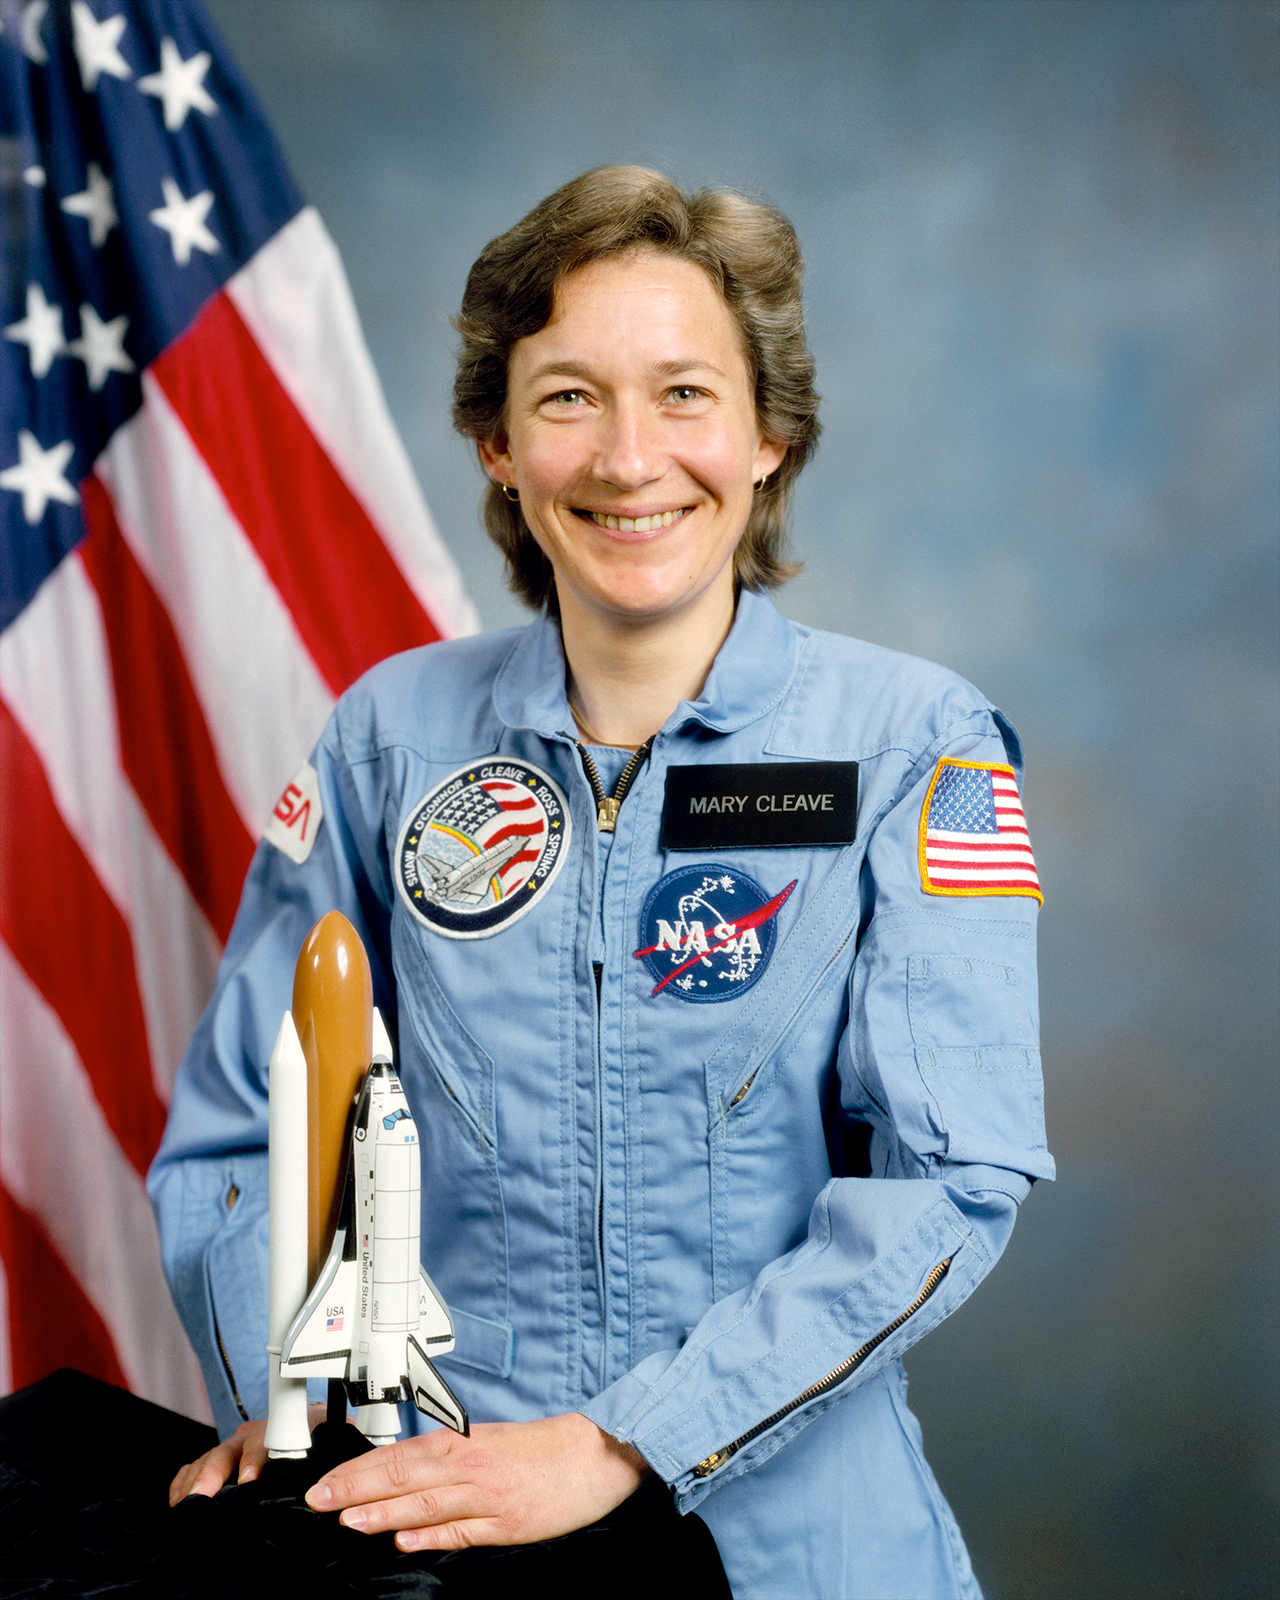 NASA portrait of STS-61B mission specialist Mary Cleave.